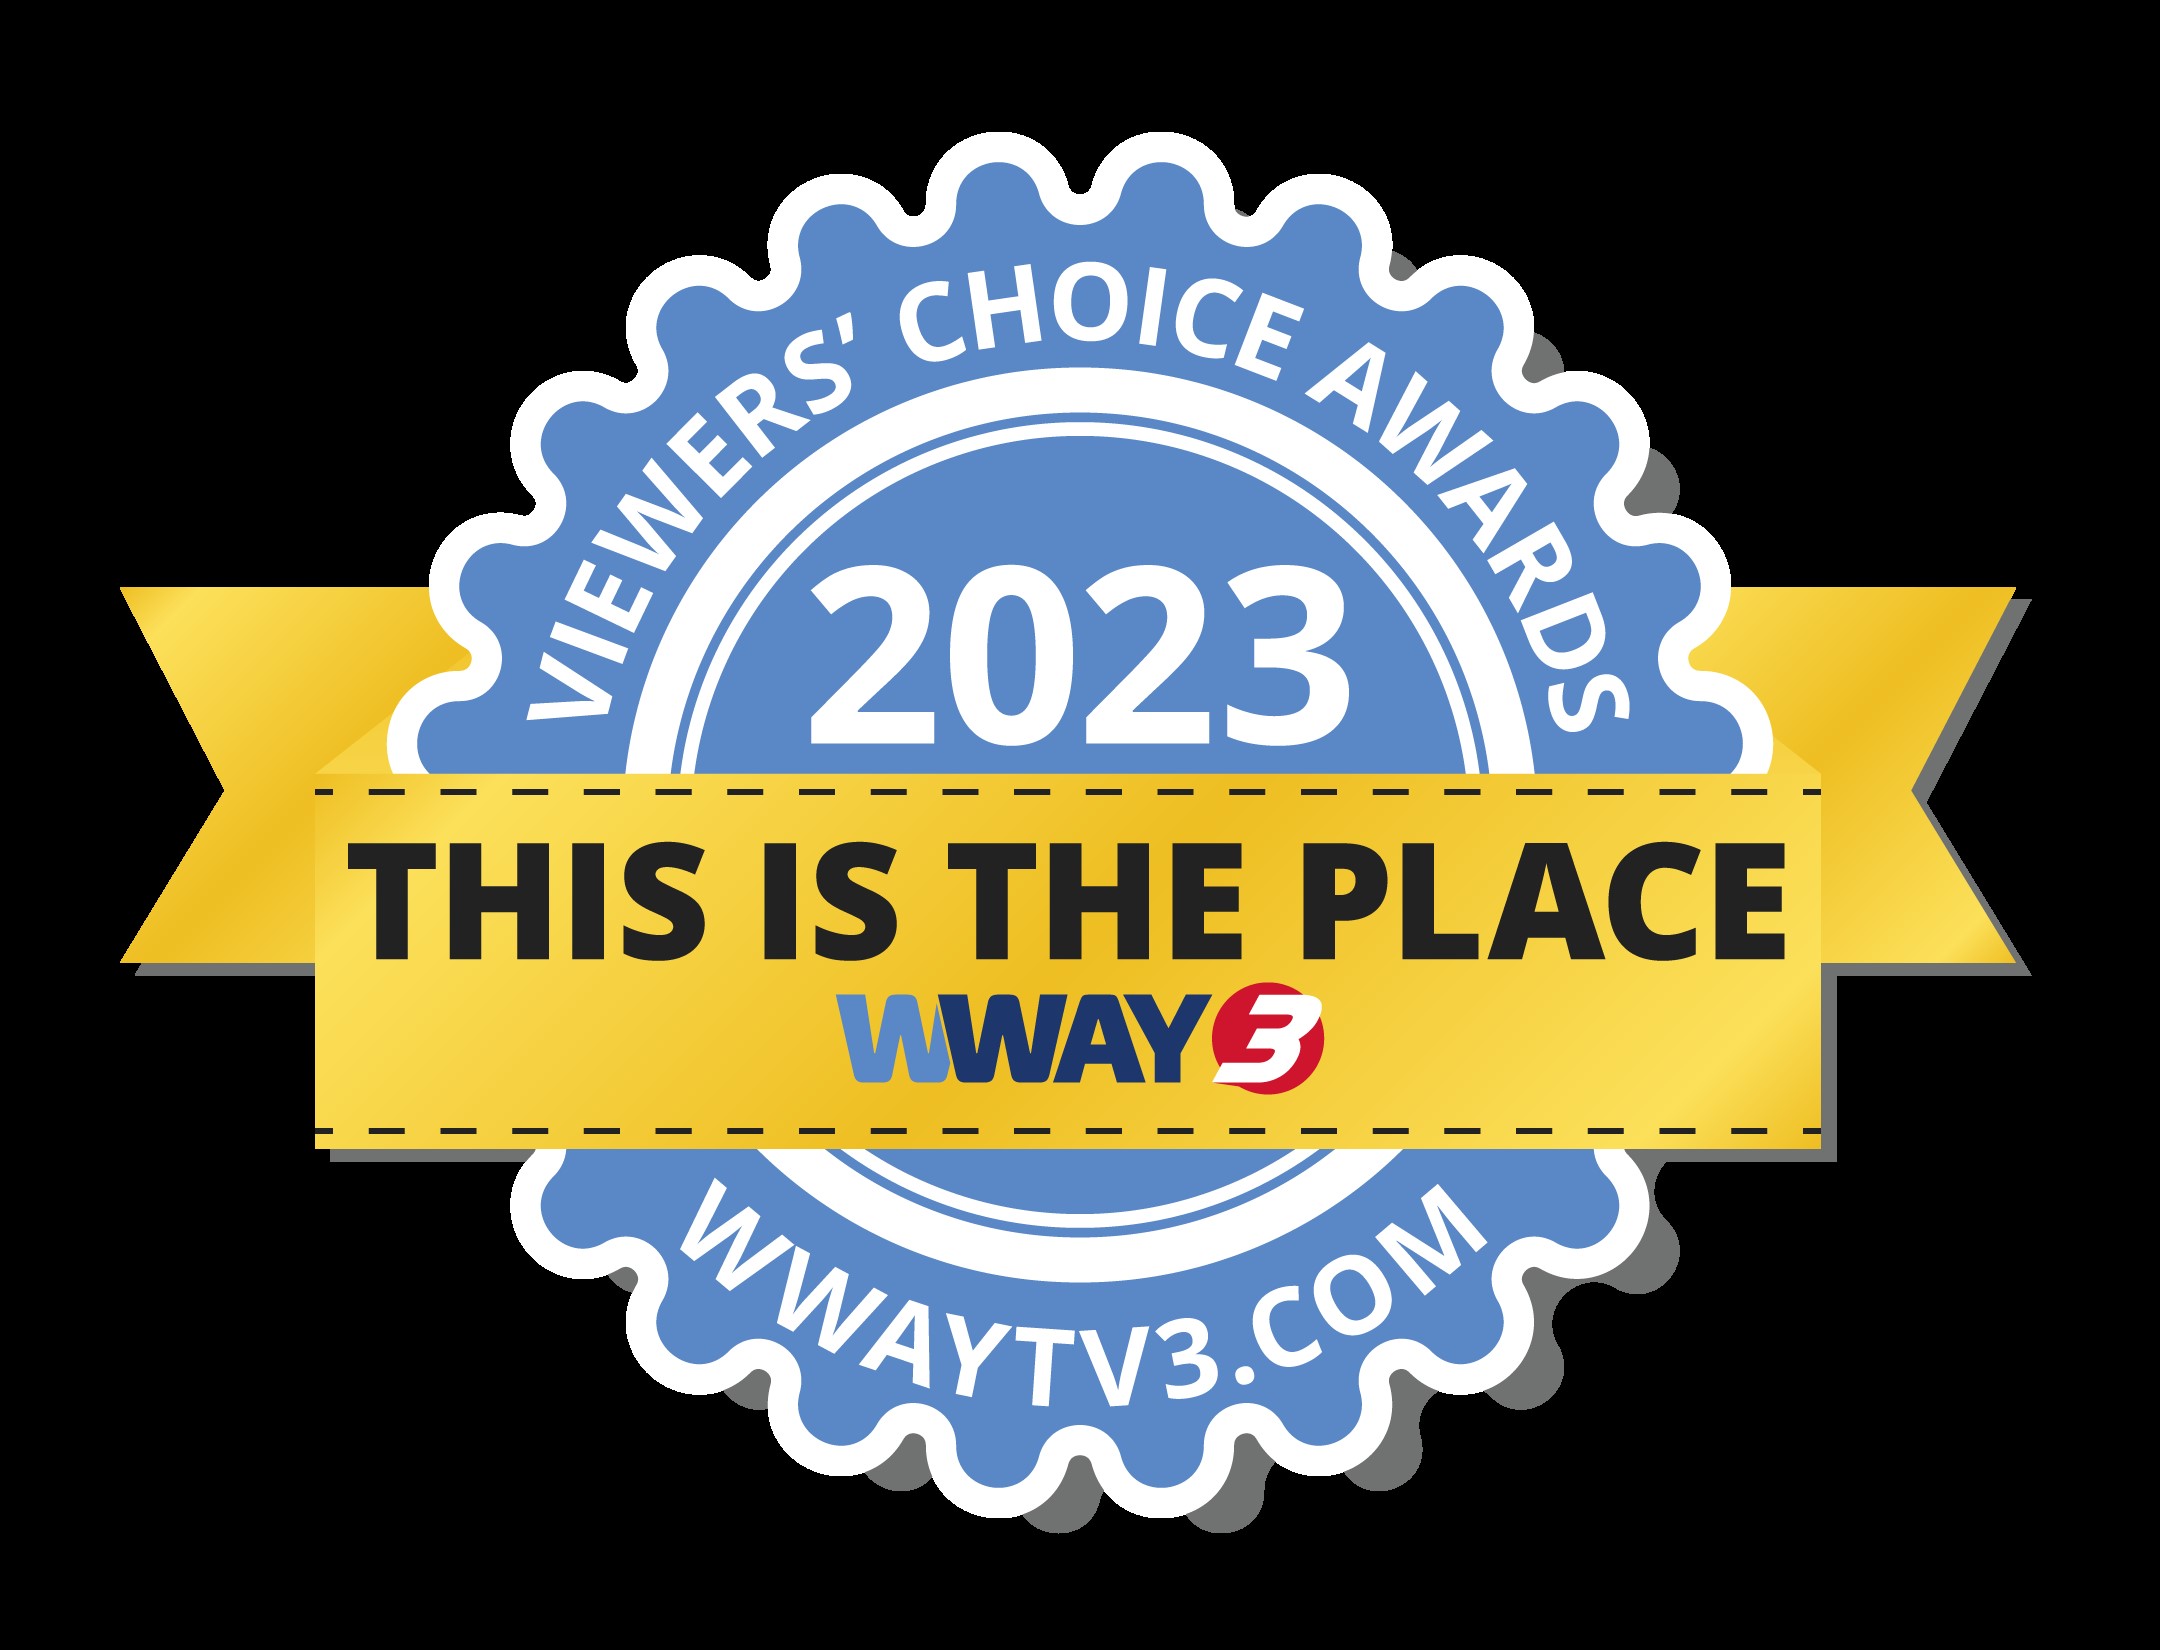 Coastal Pointe Named Best Assisted Living in Viewers' Choice Awards